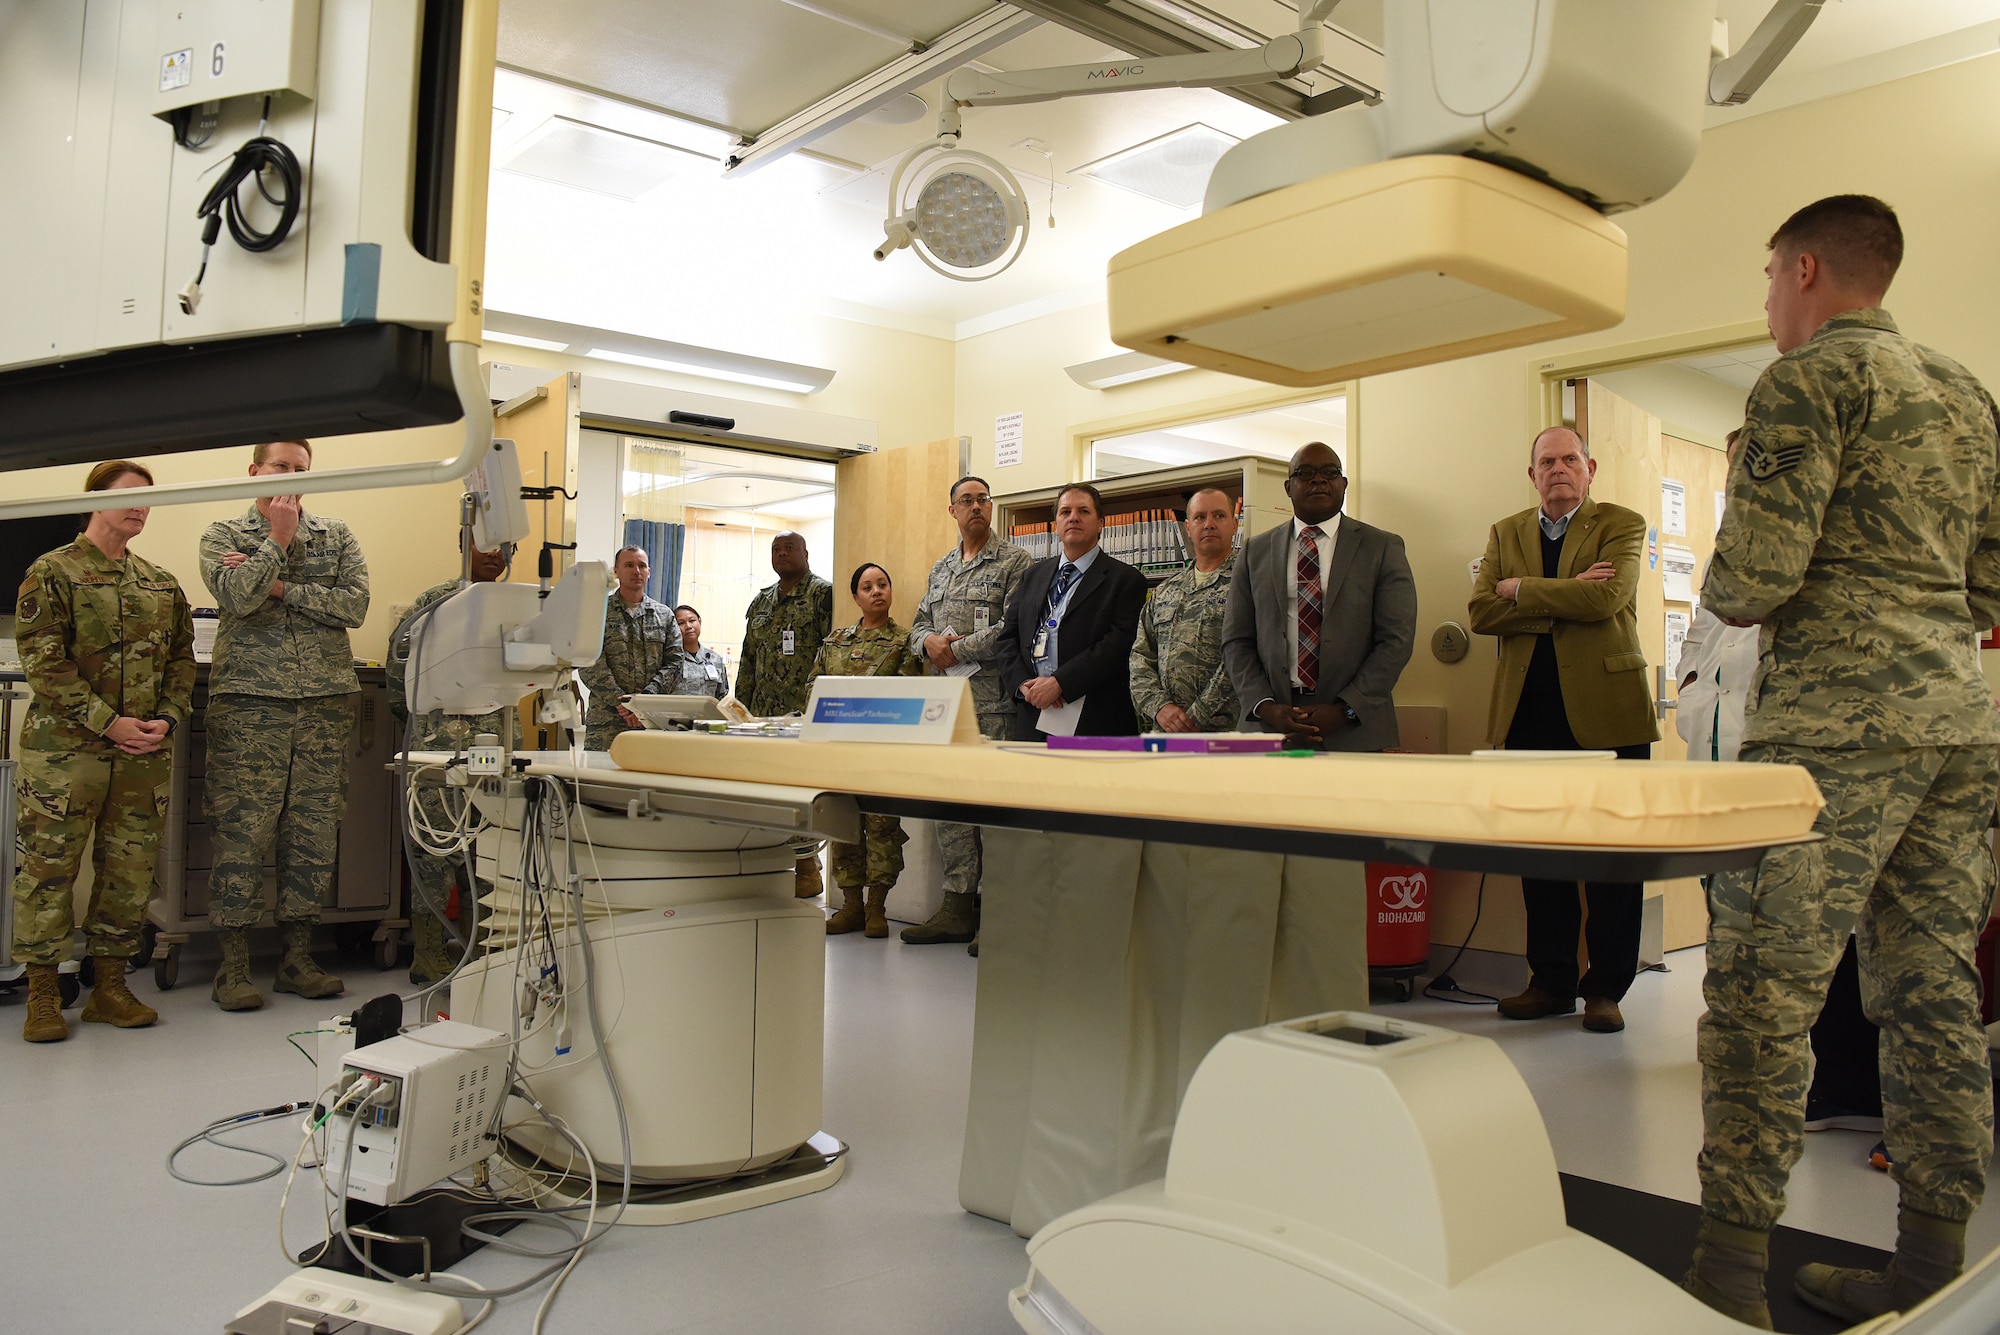 U.S. Air Force Staff Sgt. Matthew Slaven, 81st Medical Operations Squadron cardiopulmonary technician, briefs 81st Medical Group staff and guests on cath lab capabilities during the cardiac catheterization laboratory ribbon cutting ceremony inside Keesler Medical Center at Keesler Air Force Base, Mississippi, Nov. 15, 2019. The lab was upgraded with an entire suite of technology to provide better and safer care for patients and the surgical team. (U.S. Air Force photo by Senior Airman Suzie Plotnikov)